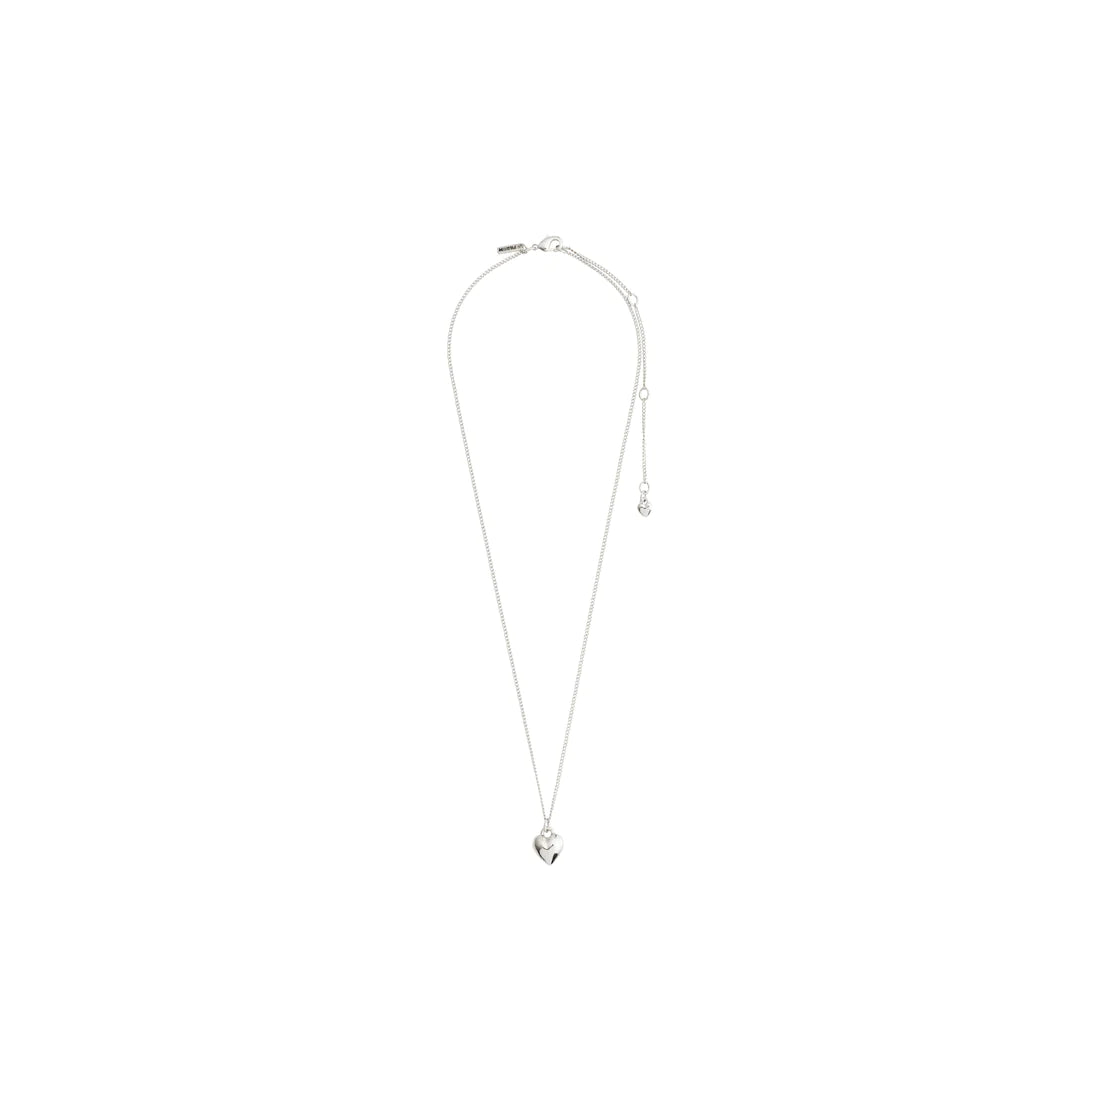 Afroditte Heart Necklace - silver